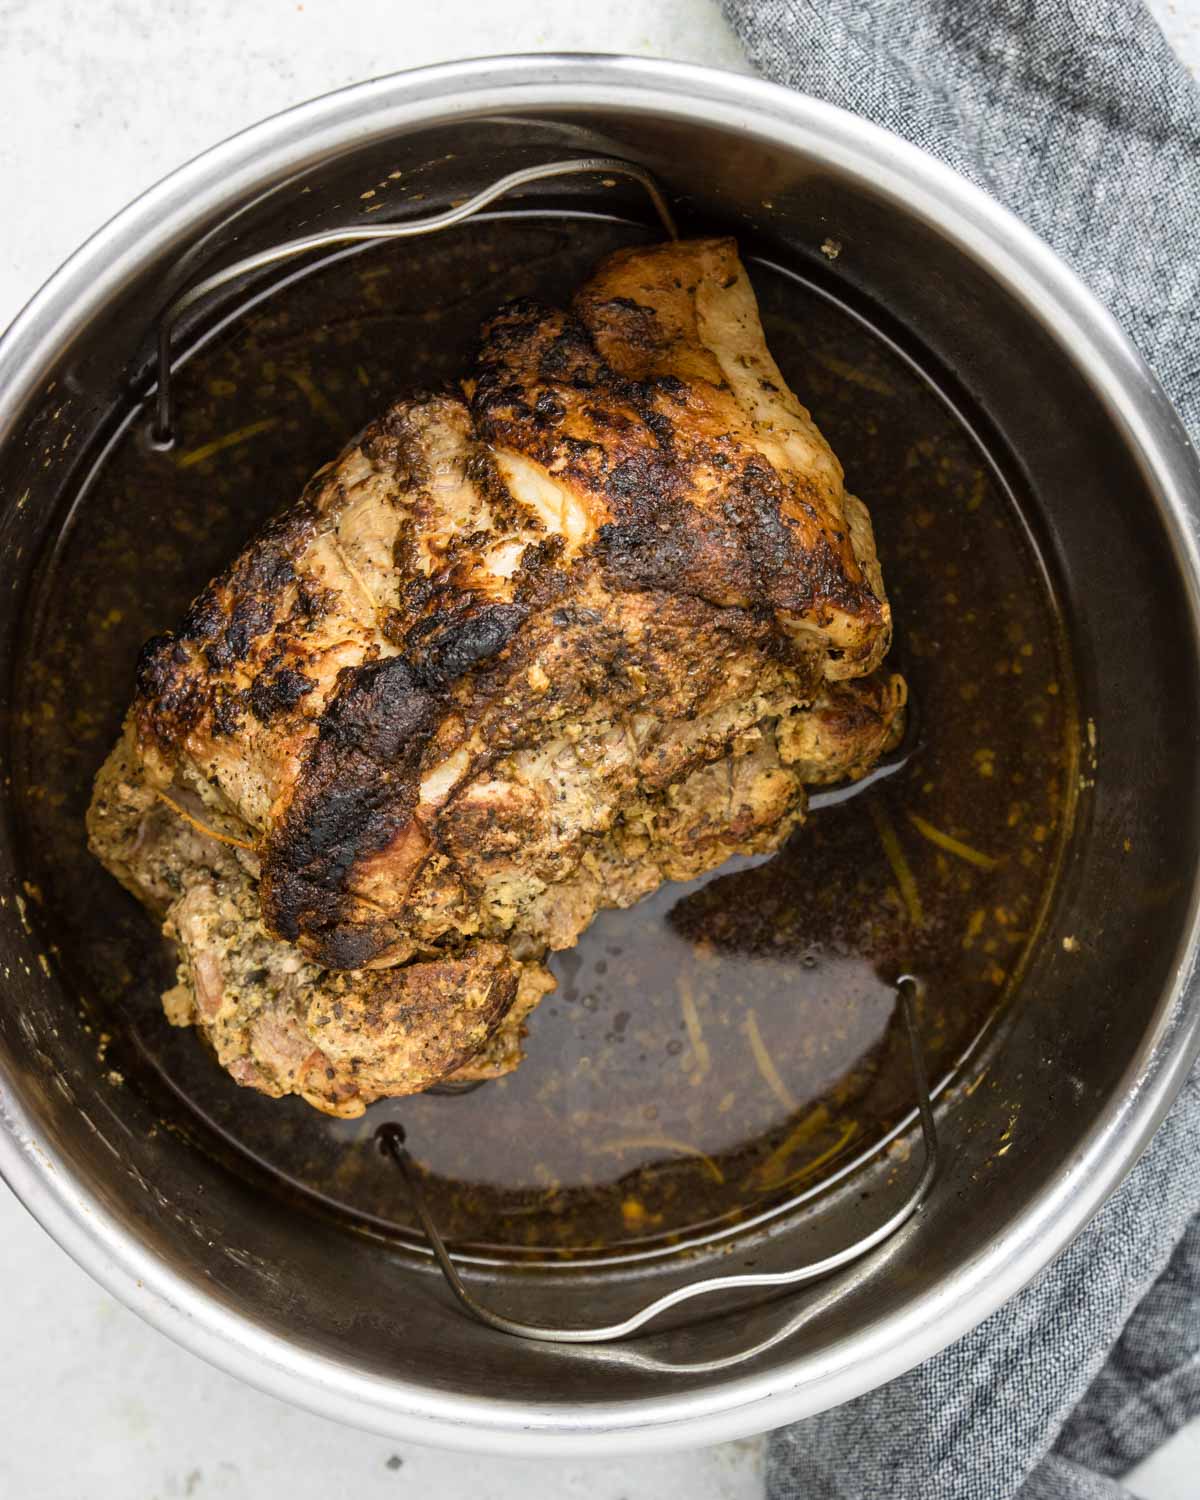 How Long Do I Cook A Pork Roast In The Electric Pressure Cooker